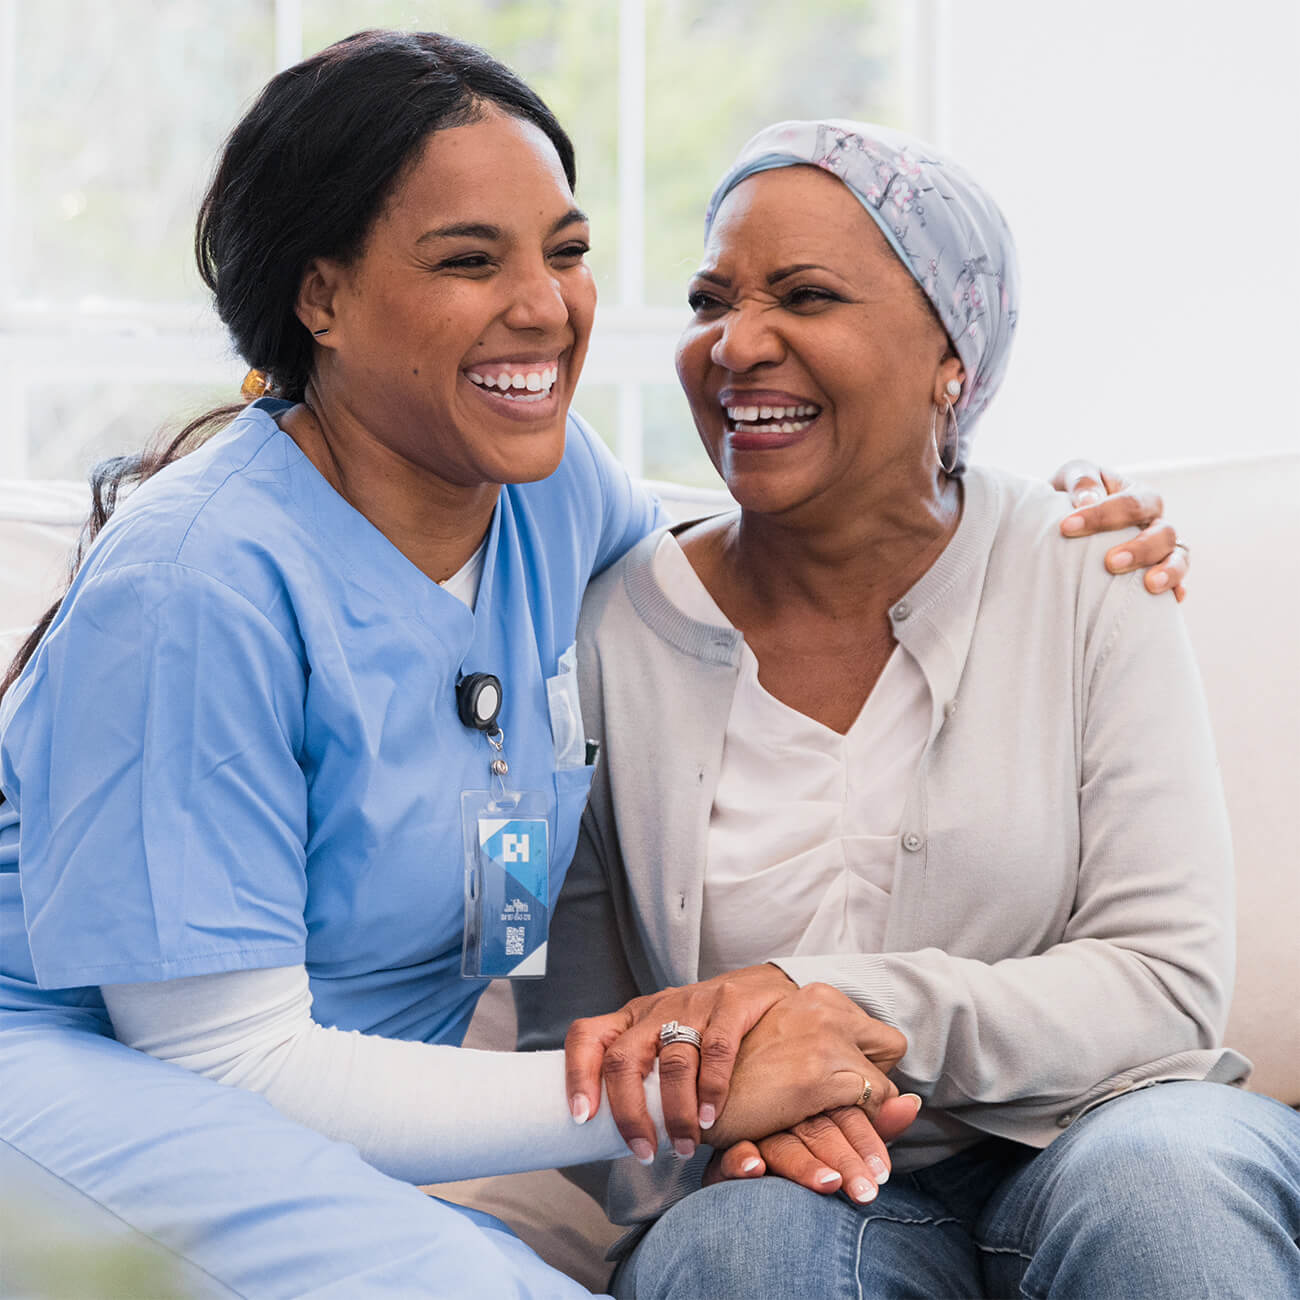 A female nurse in blue scrubs shares a joyful moment with an older woman wearing a headscarf, both laughing together in a brightly lit room.